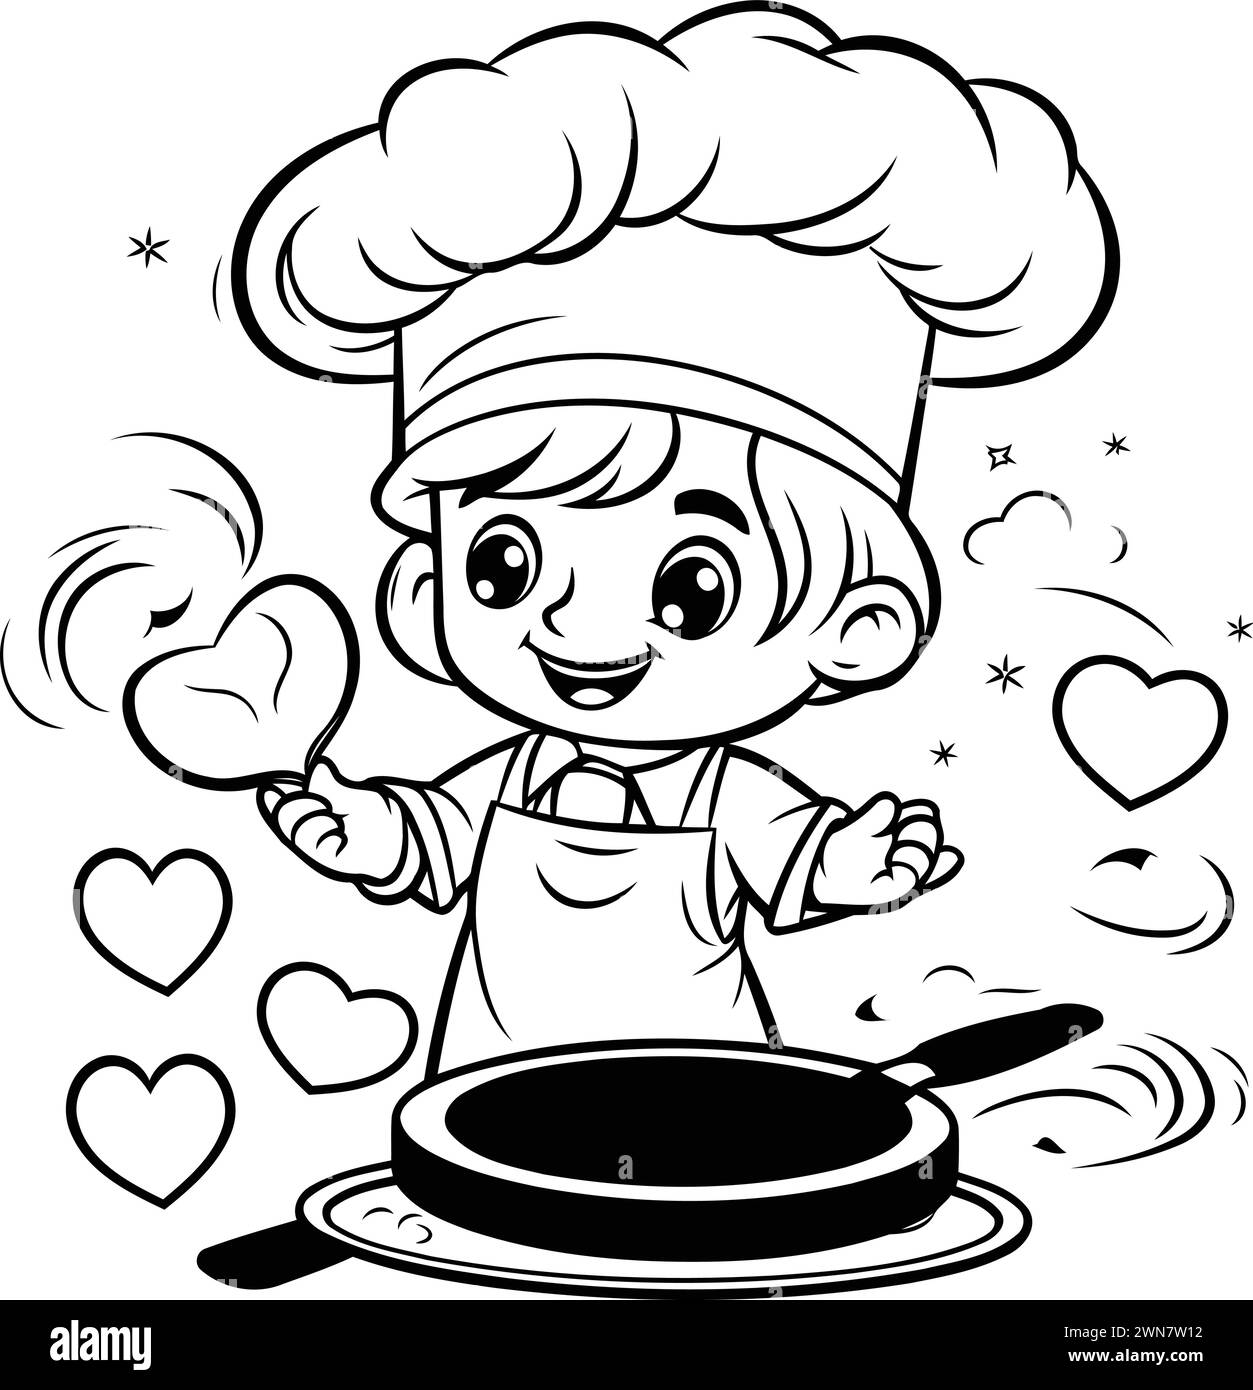 Black and White Cartoon Illustration of Cute Little Boy Chef Cooking Food for Coloring Book Stock Vector